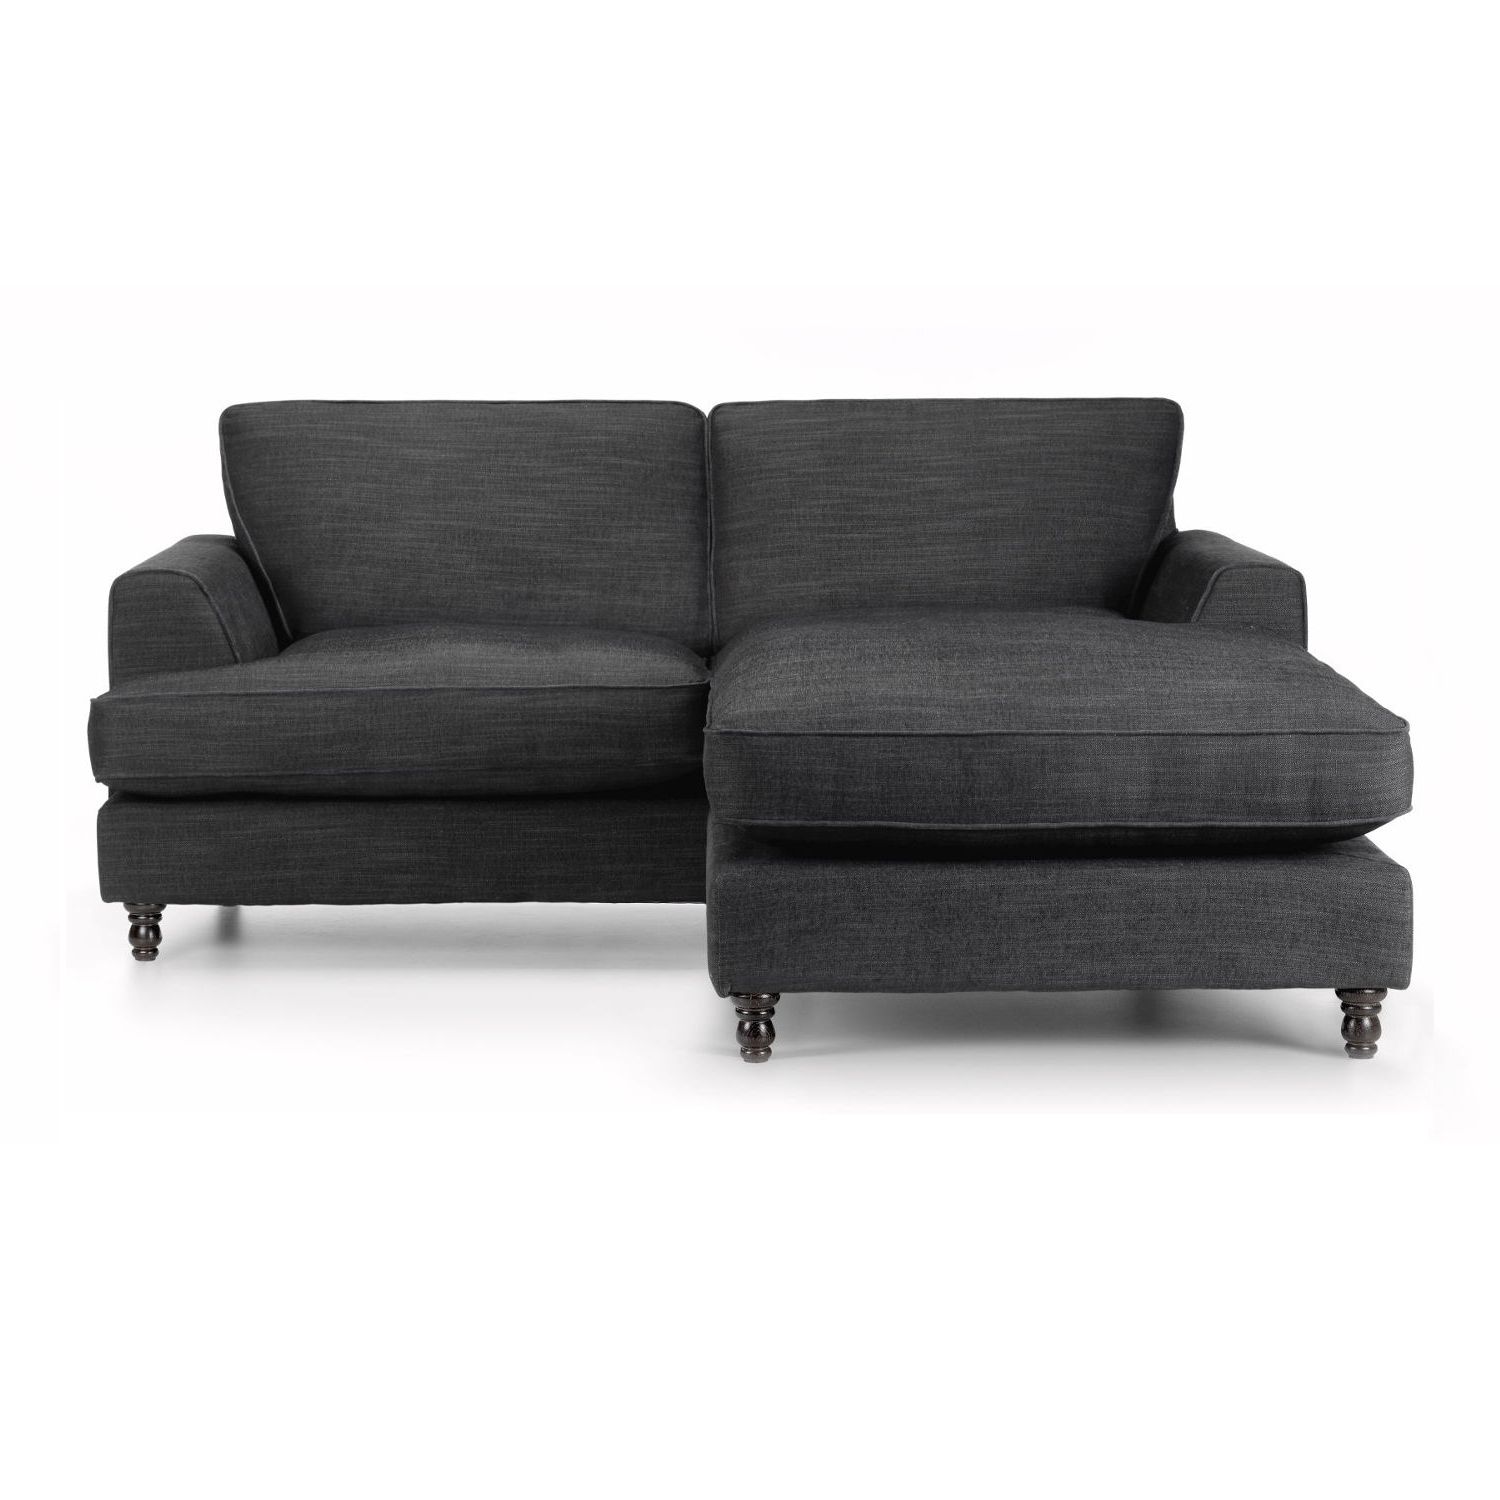 Most Popular Reversible Chaise Sofas Inside Elena Reversible Corner Chaise Sofa – Next Day Delivery Elena (View 11 of 15)